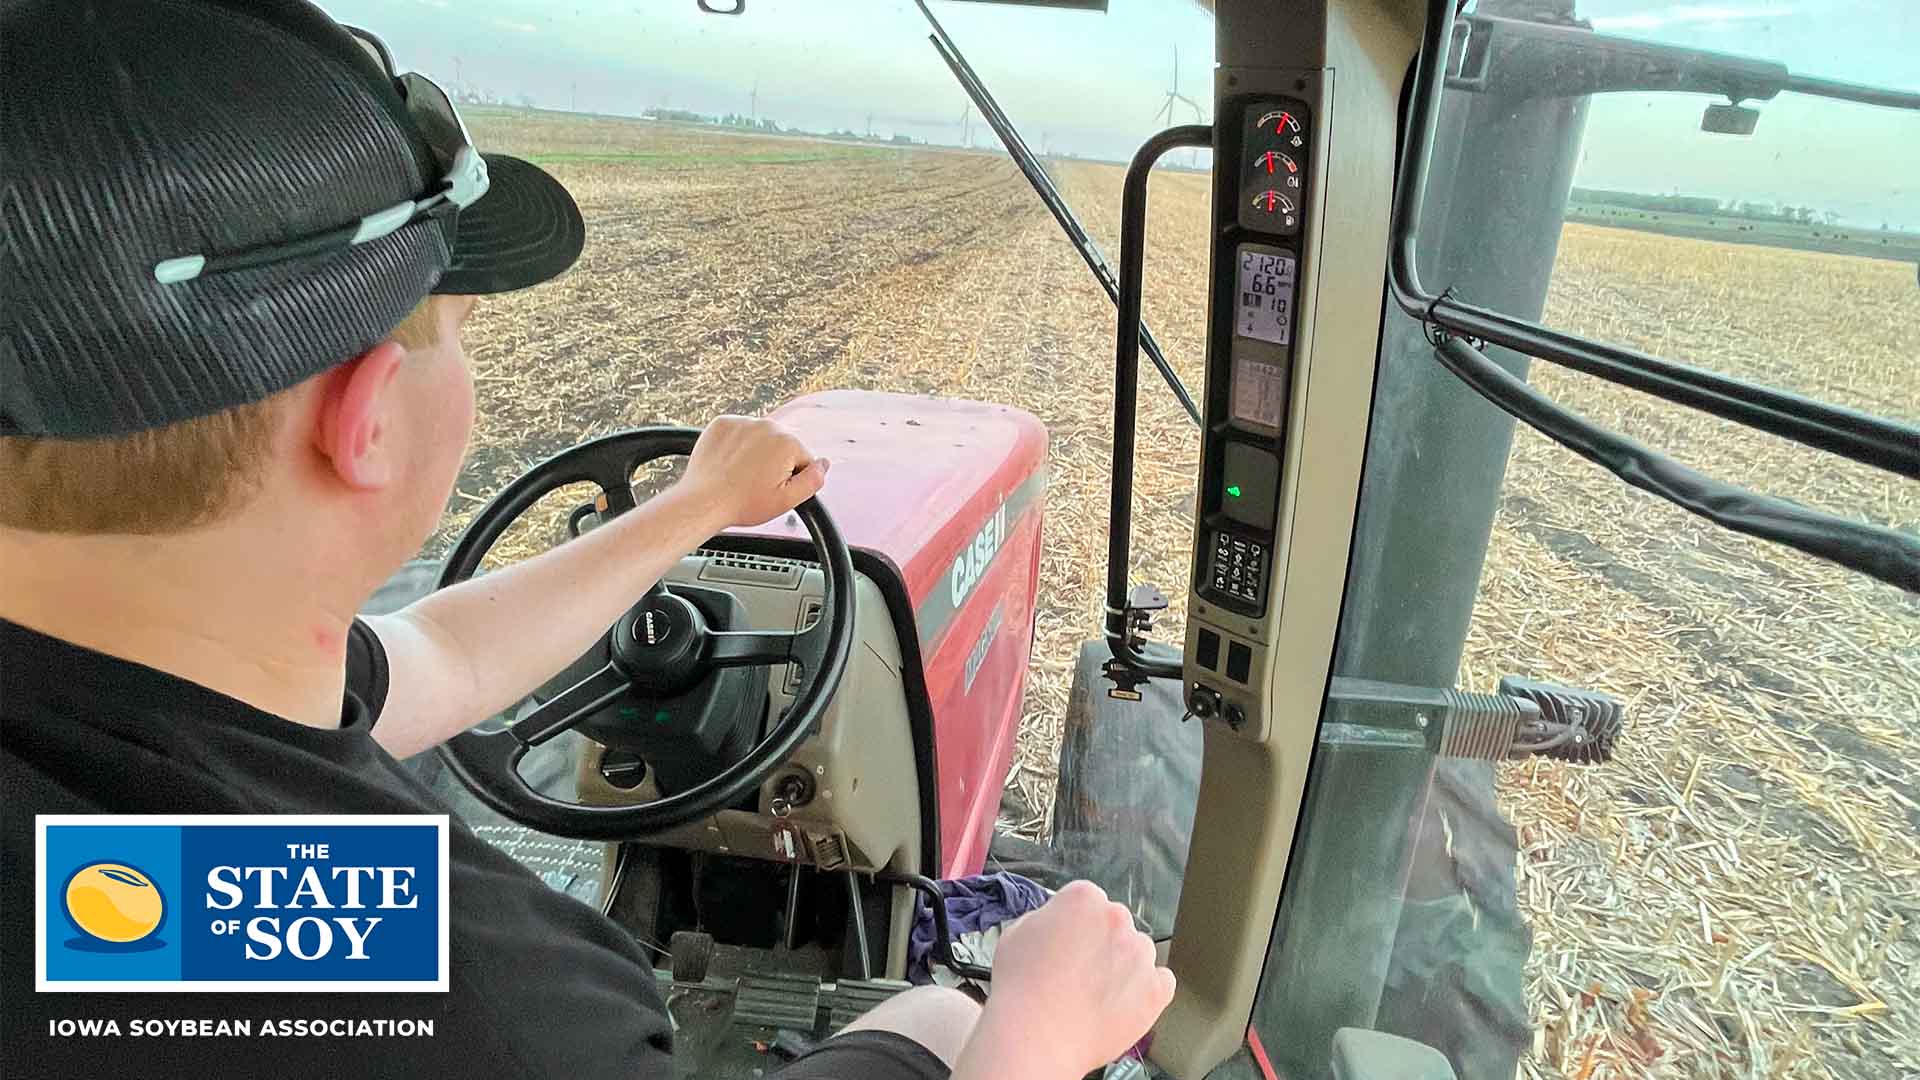 FFA chapter member driving tractor in Iowa